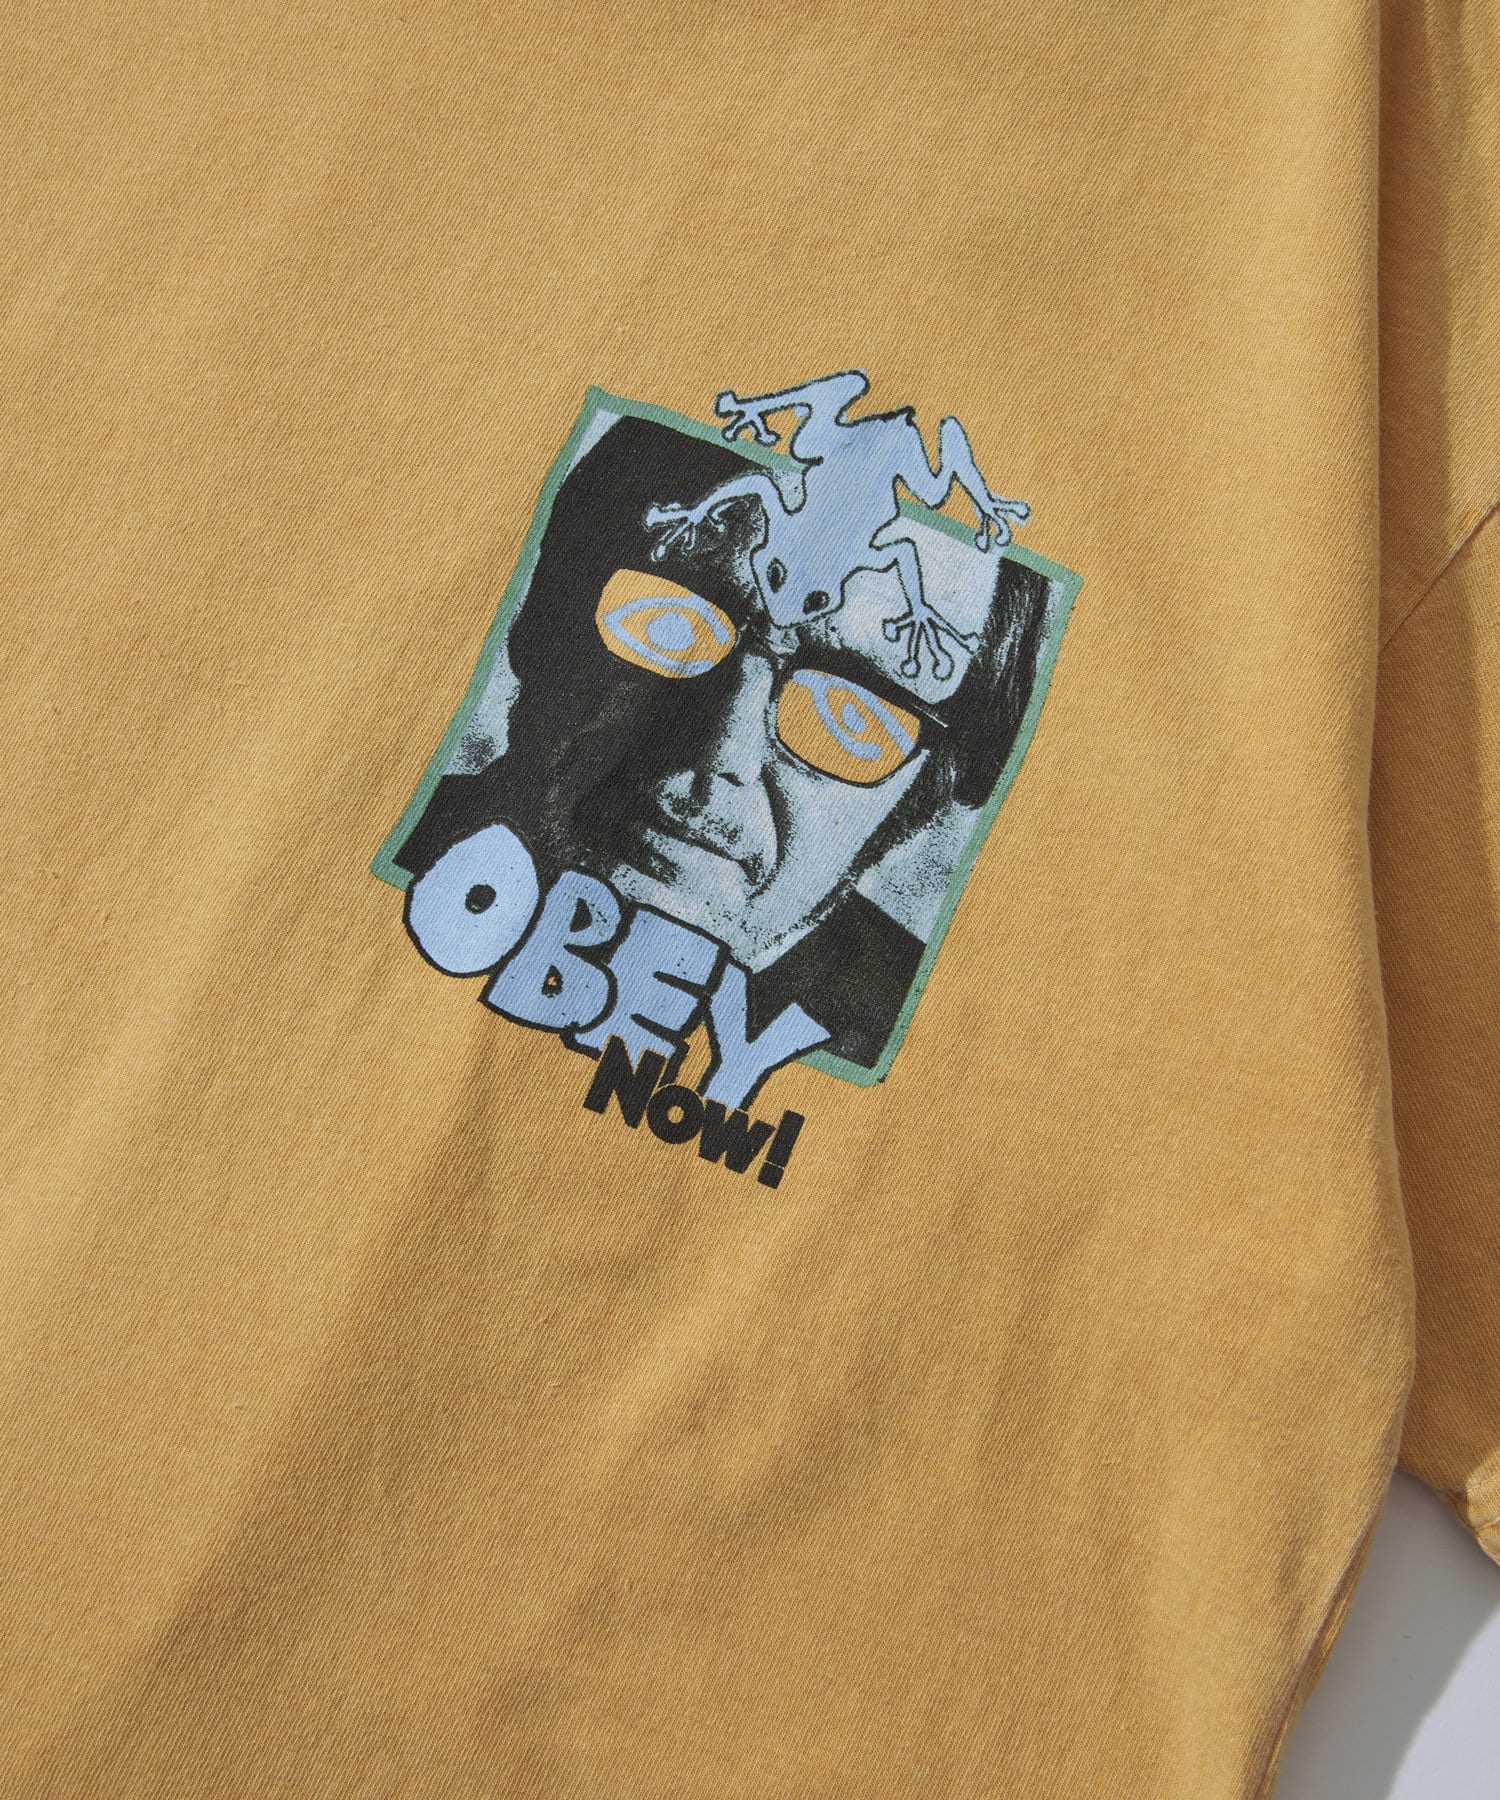 WHO’S WHO gallery(フーズフーギャラリー) 【OBEY】 NOW!　TEE